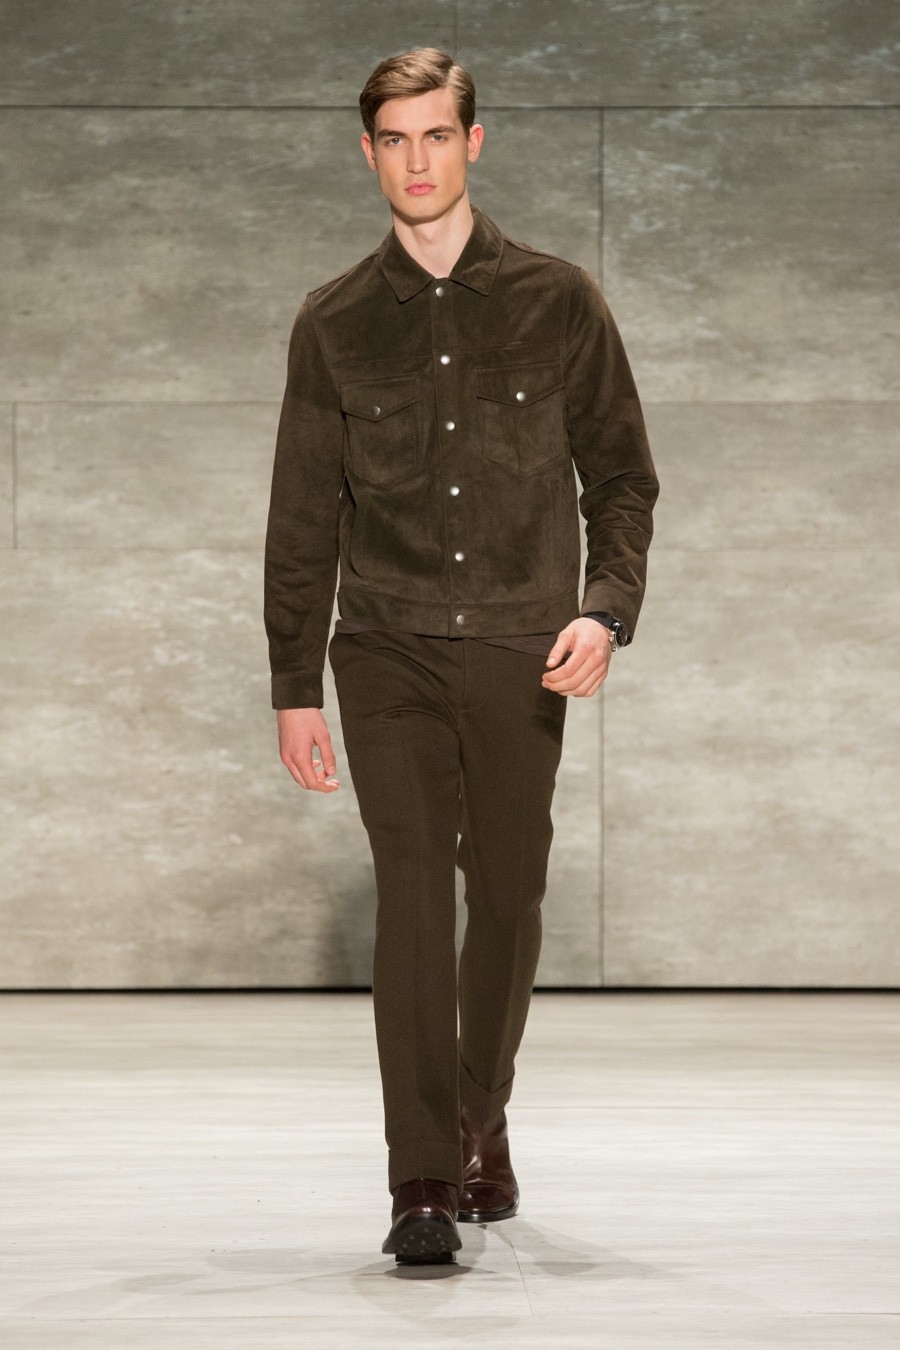 Todd Snyder Fall Winter 2015 Menswear Collection 018